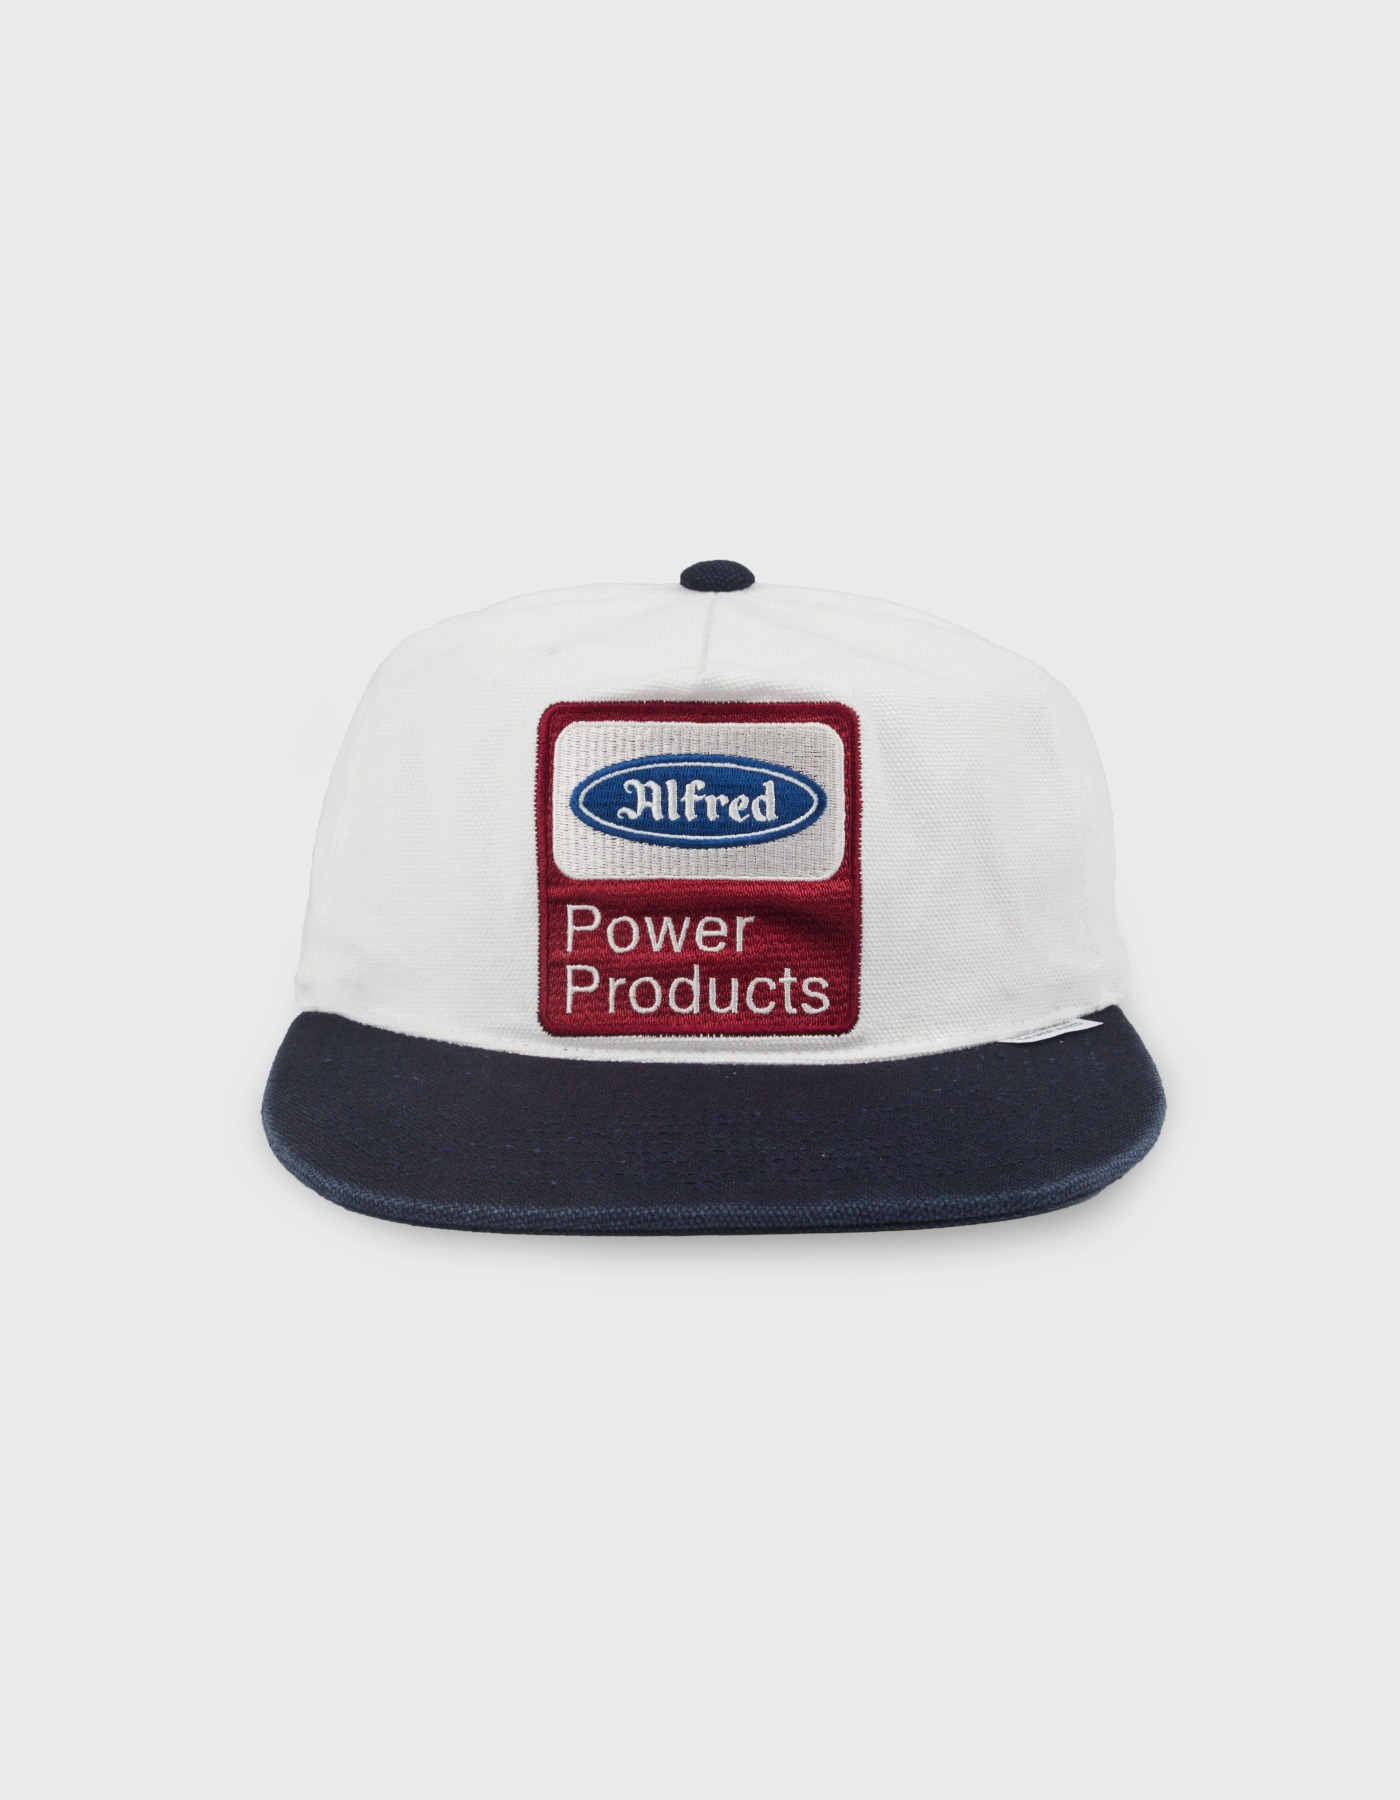 FRED POWER PRODUCTS CAP / White-Navy